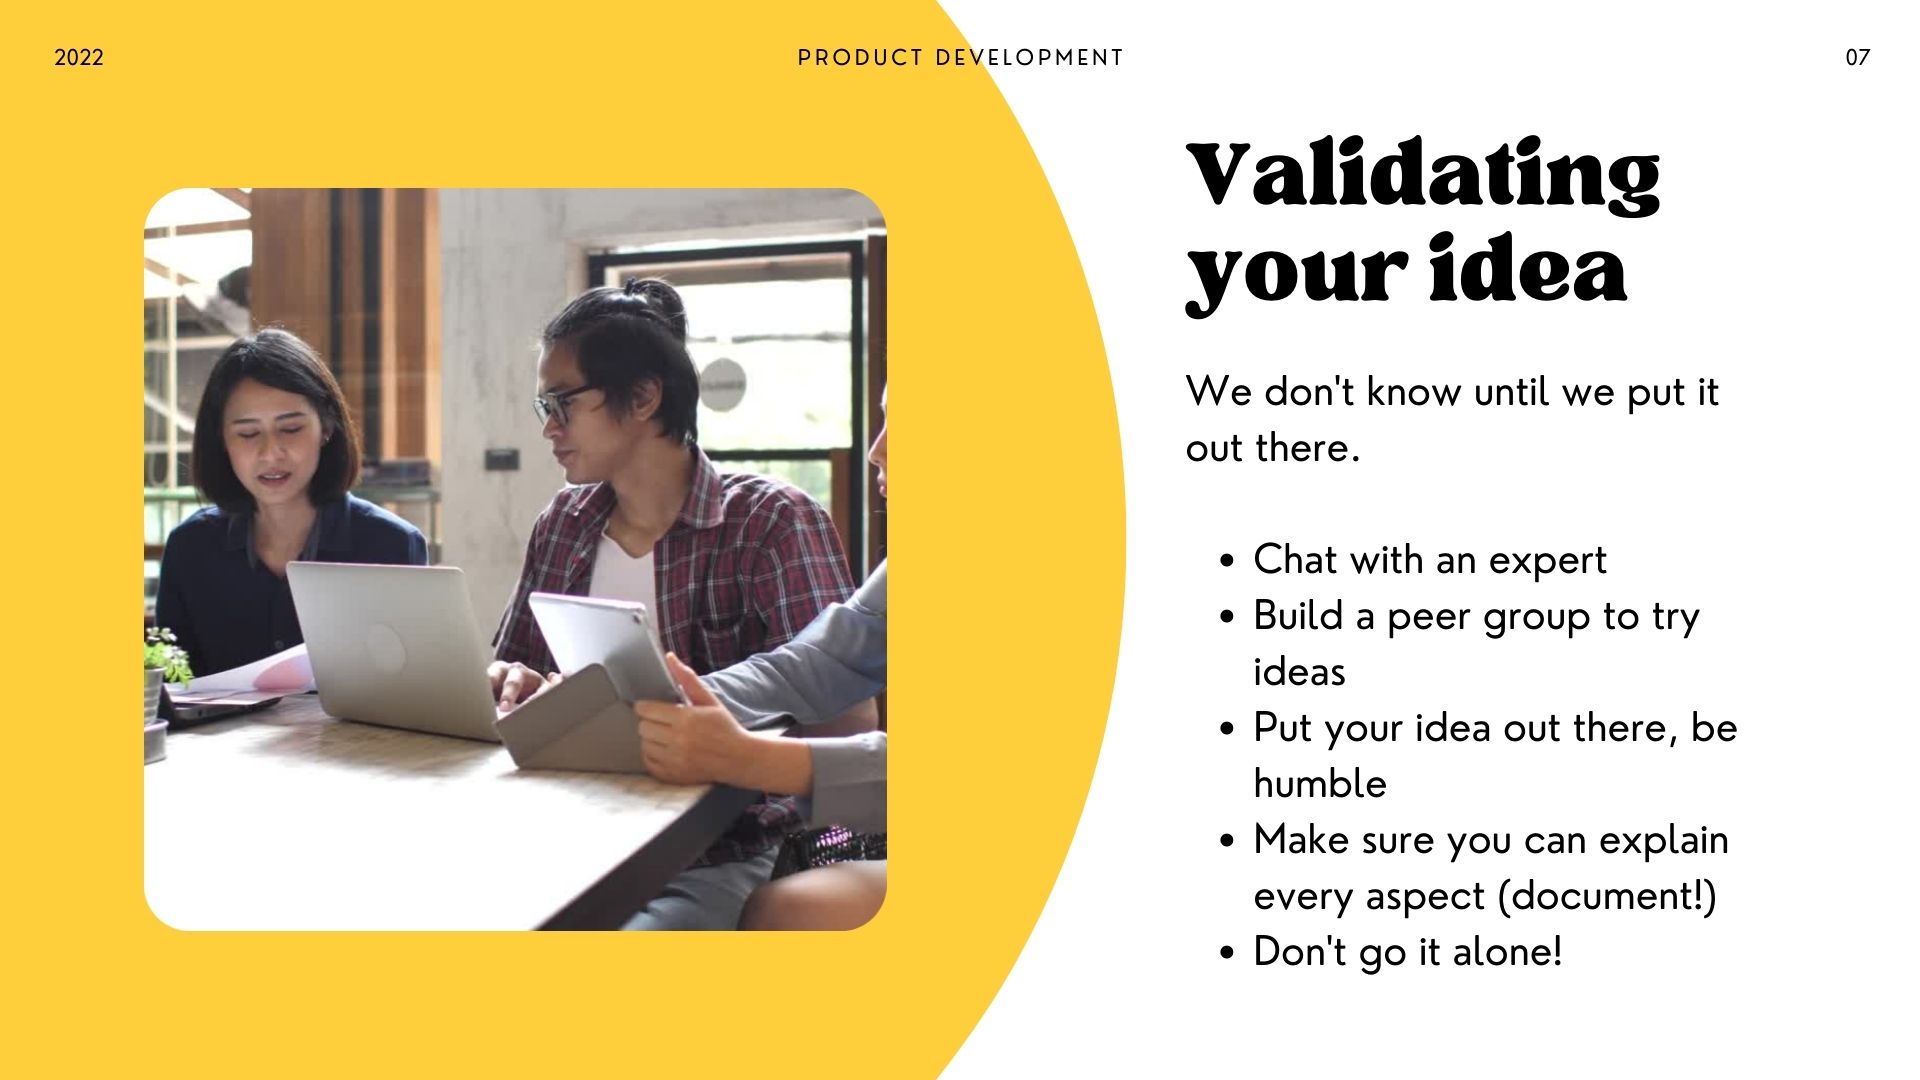 An image asking you to validate your product development idea